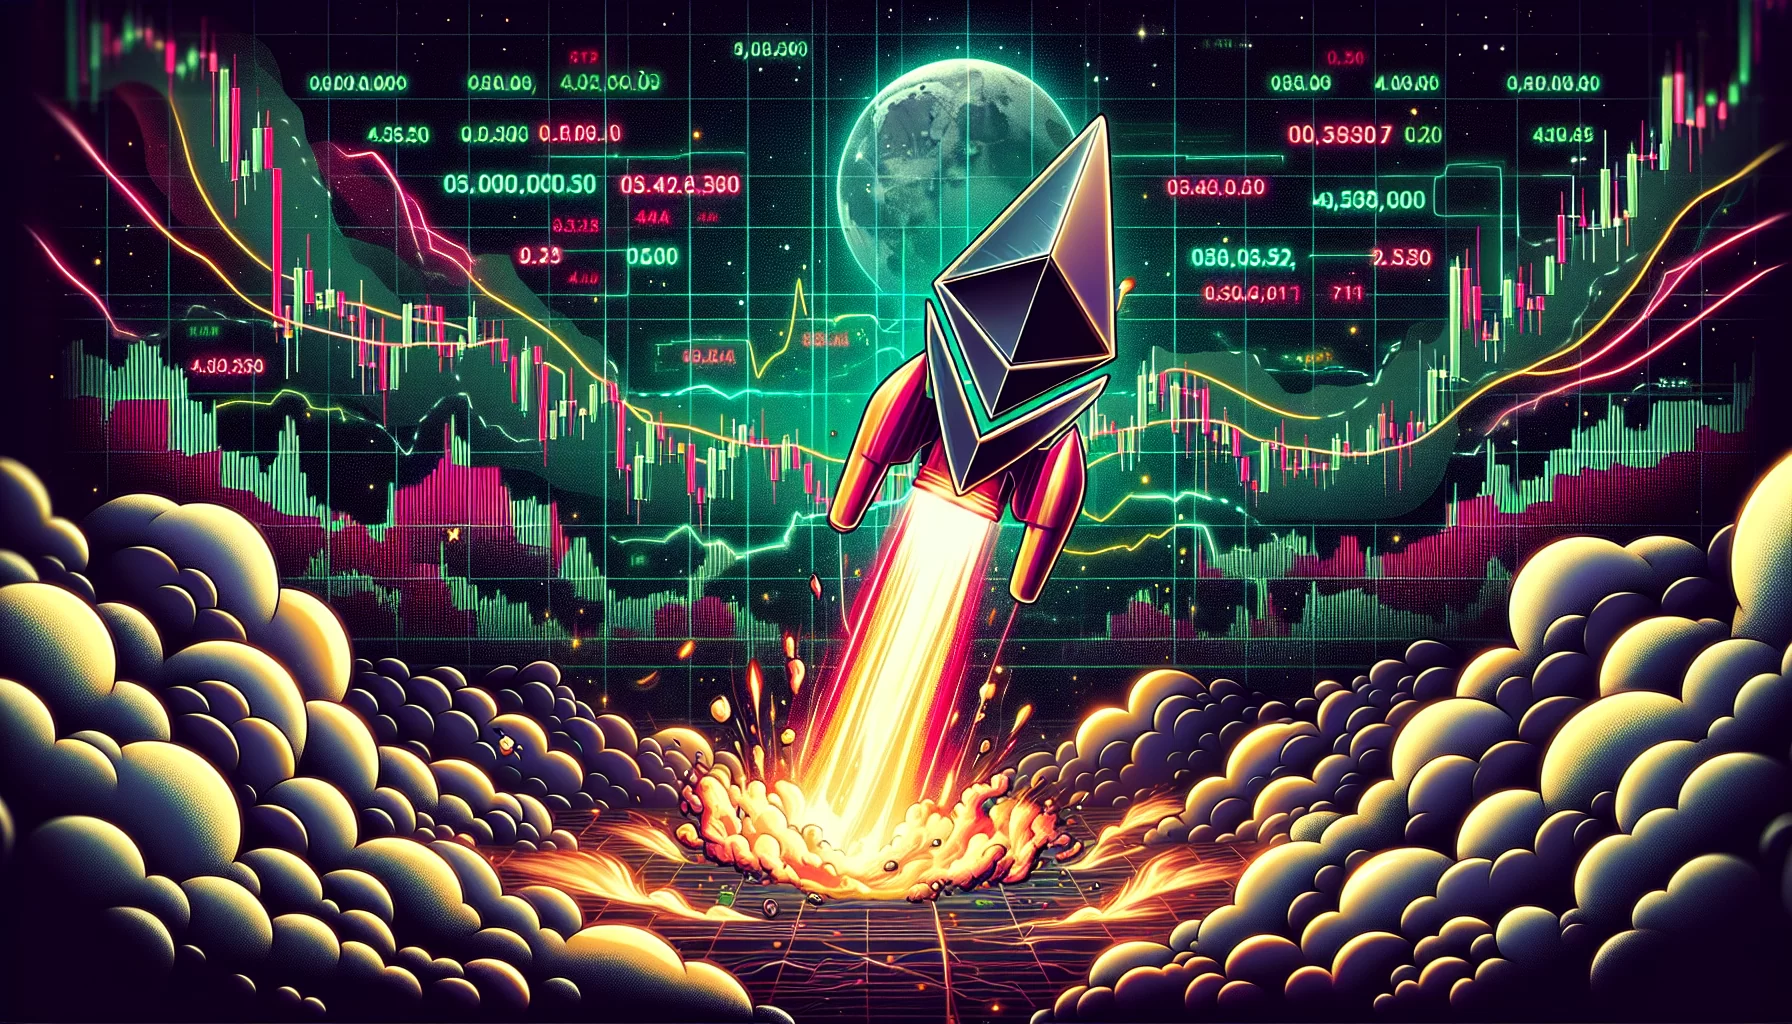 Analyzing ether's record highs: a look at the volatile cryptocurrency market